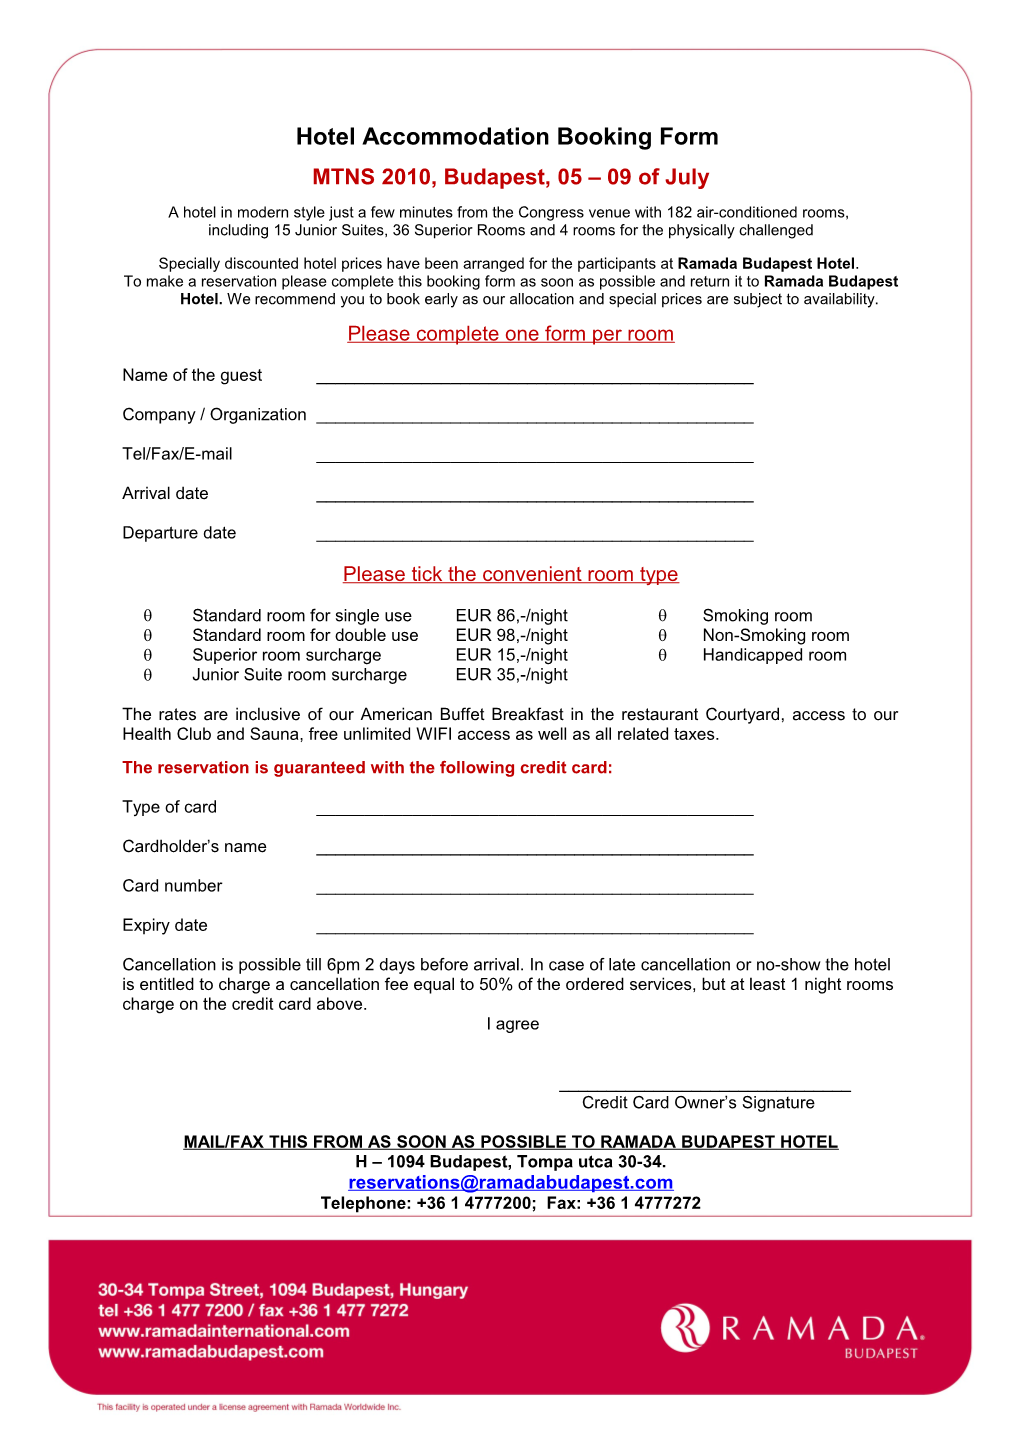 Hotel Accommodation Booking Form